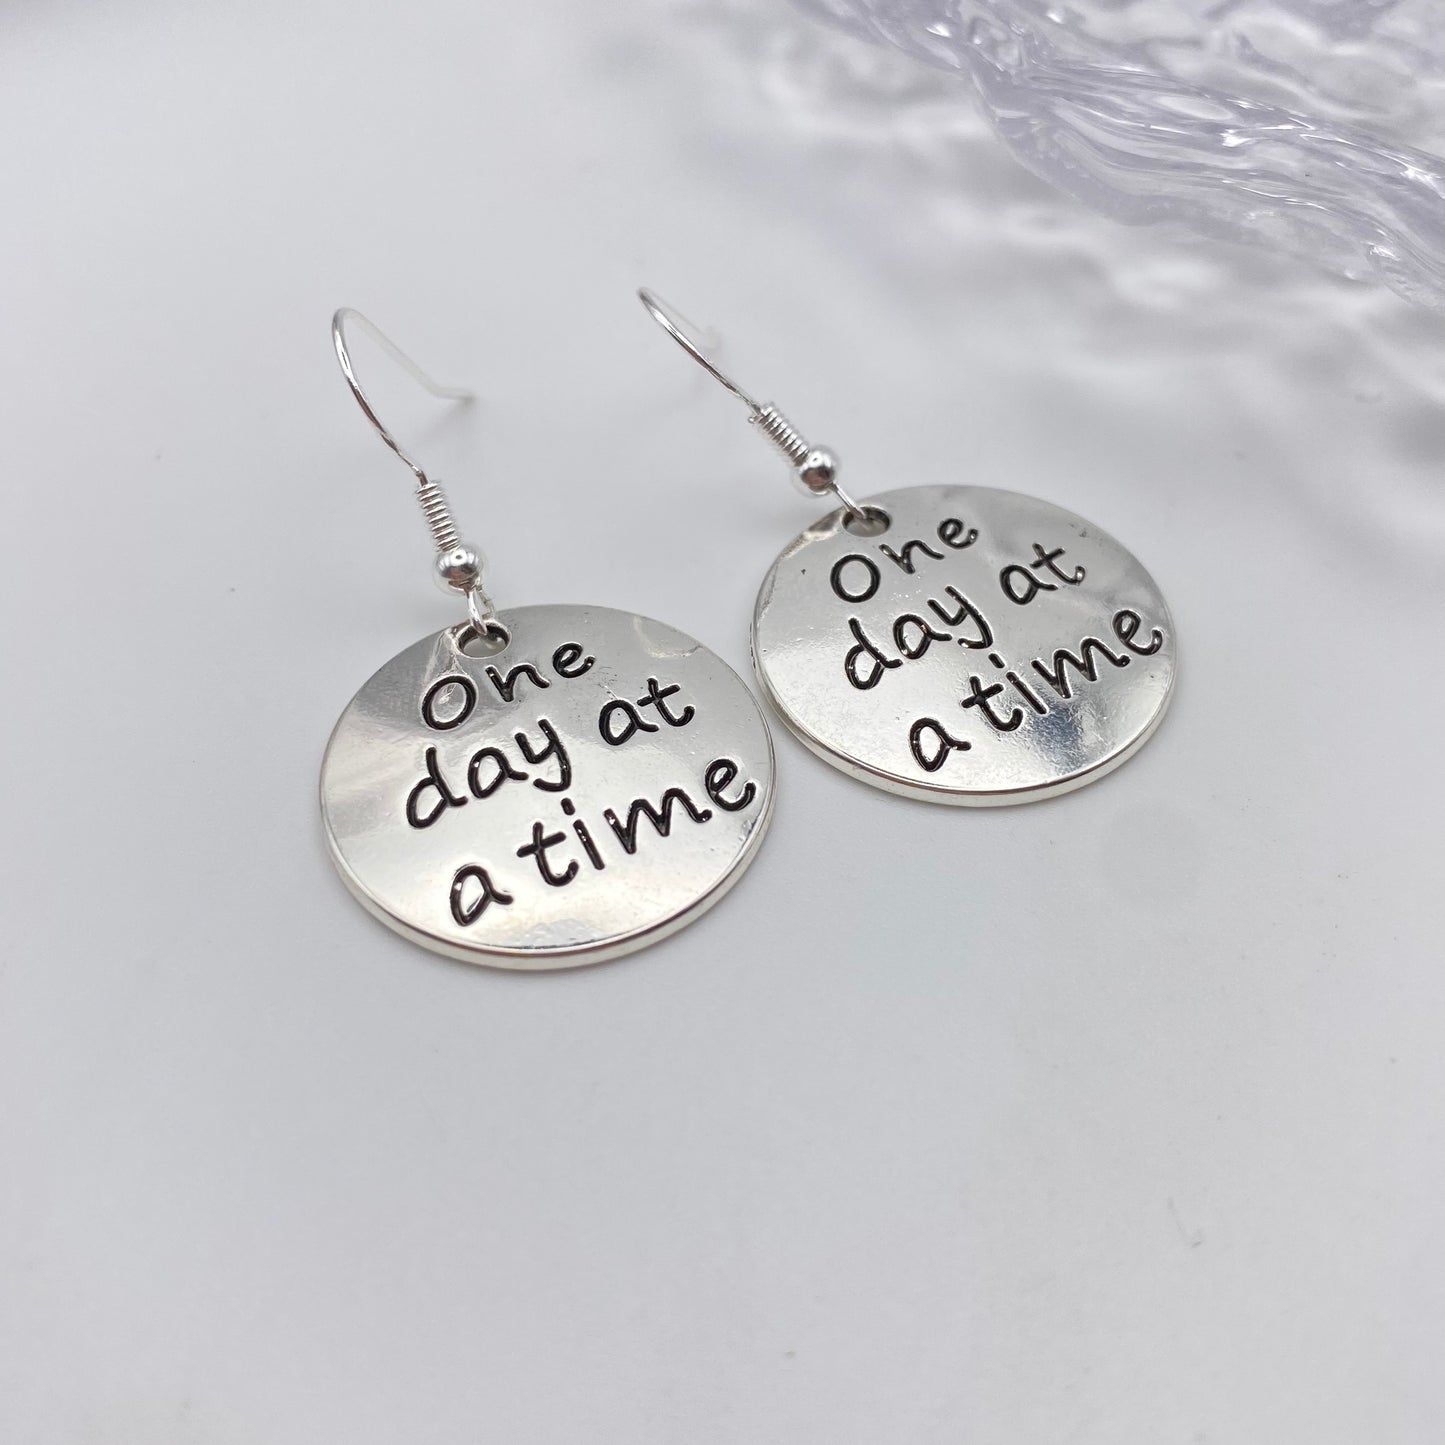 ‘One Day At A Time’ Earrings